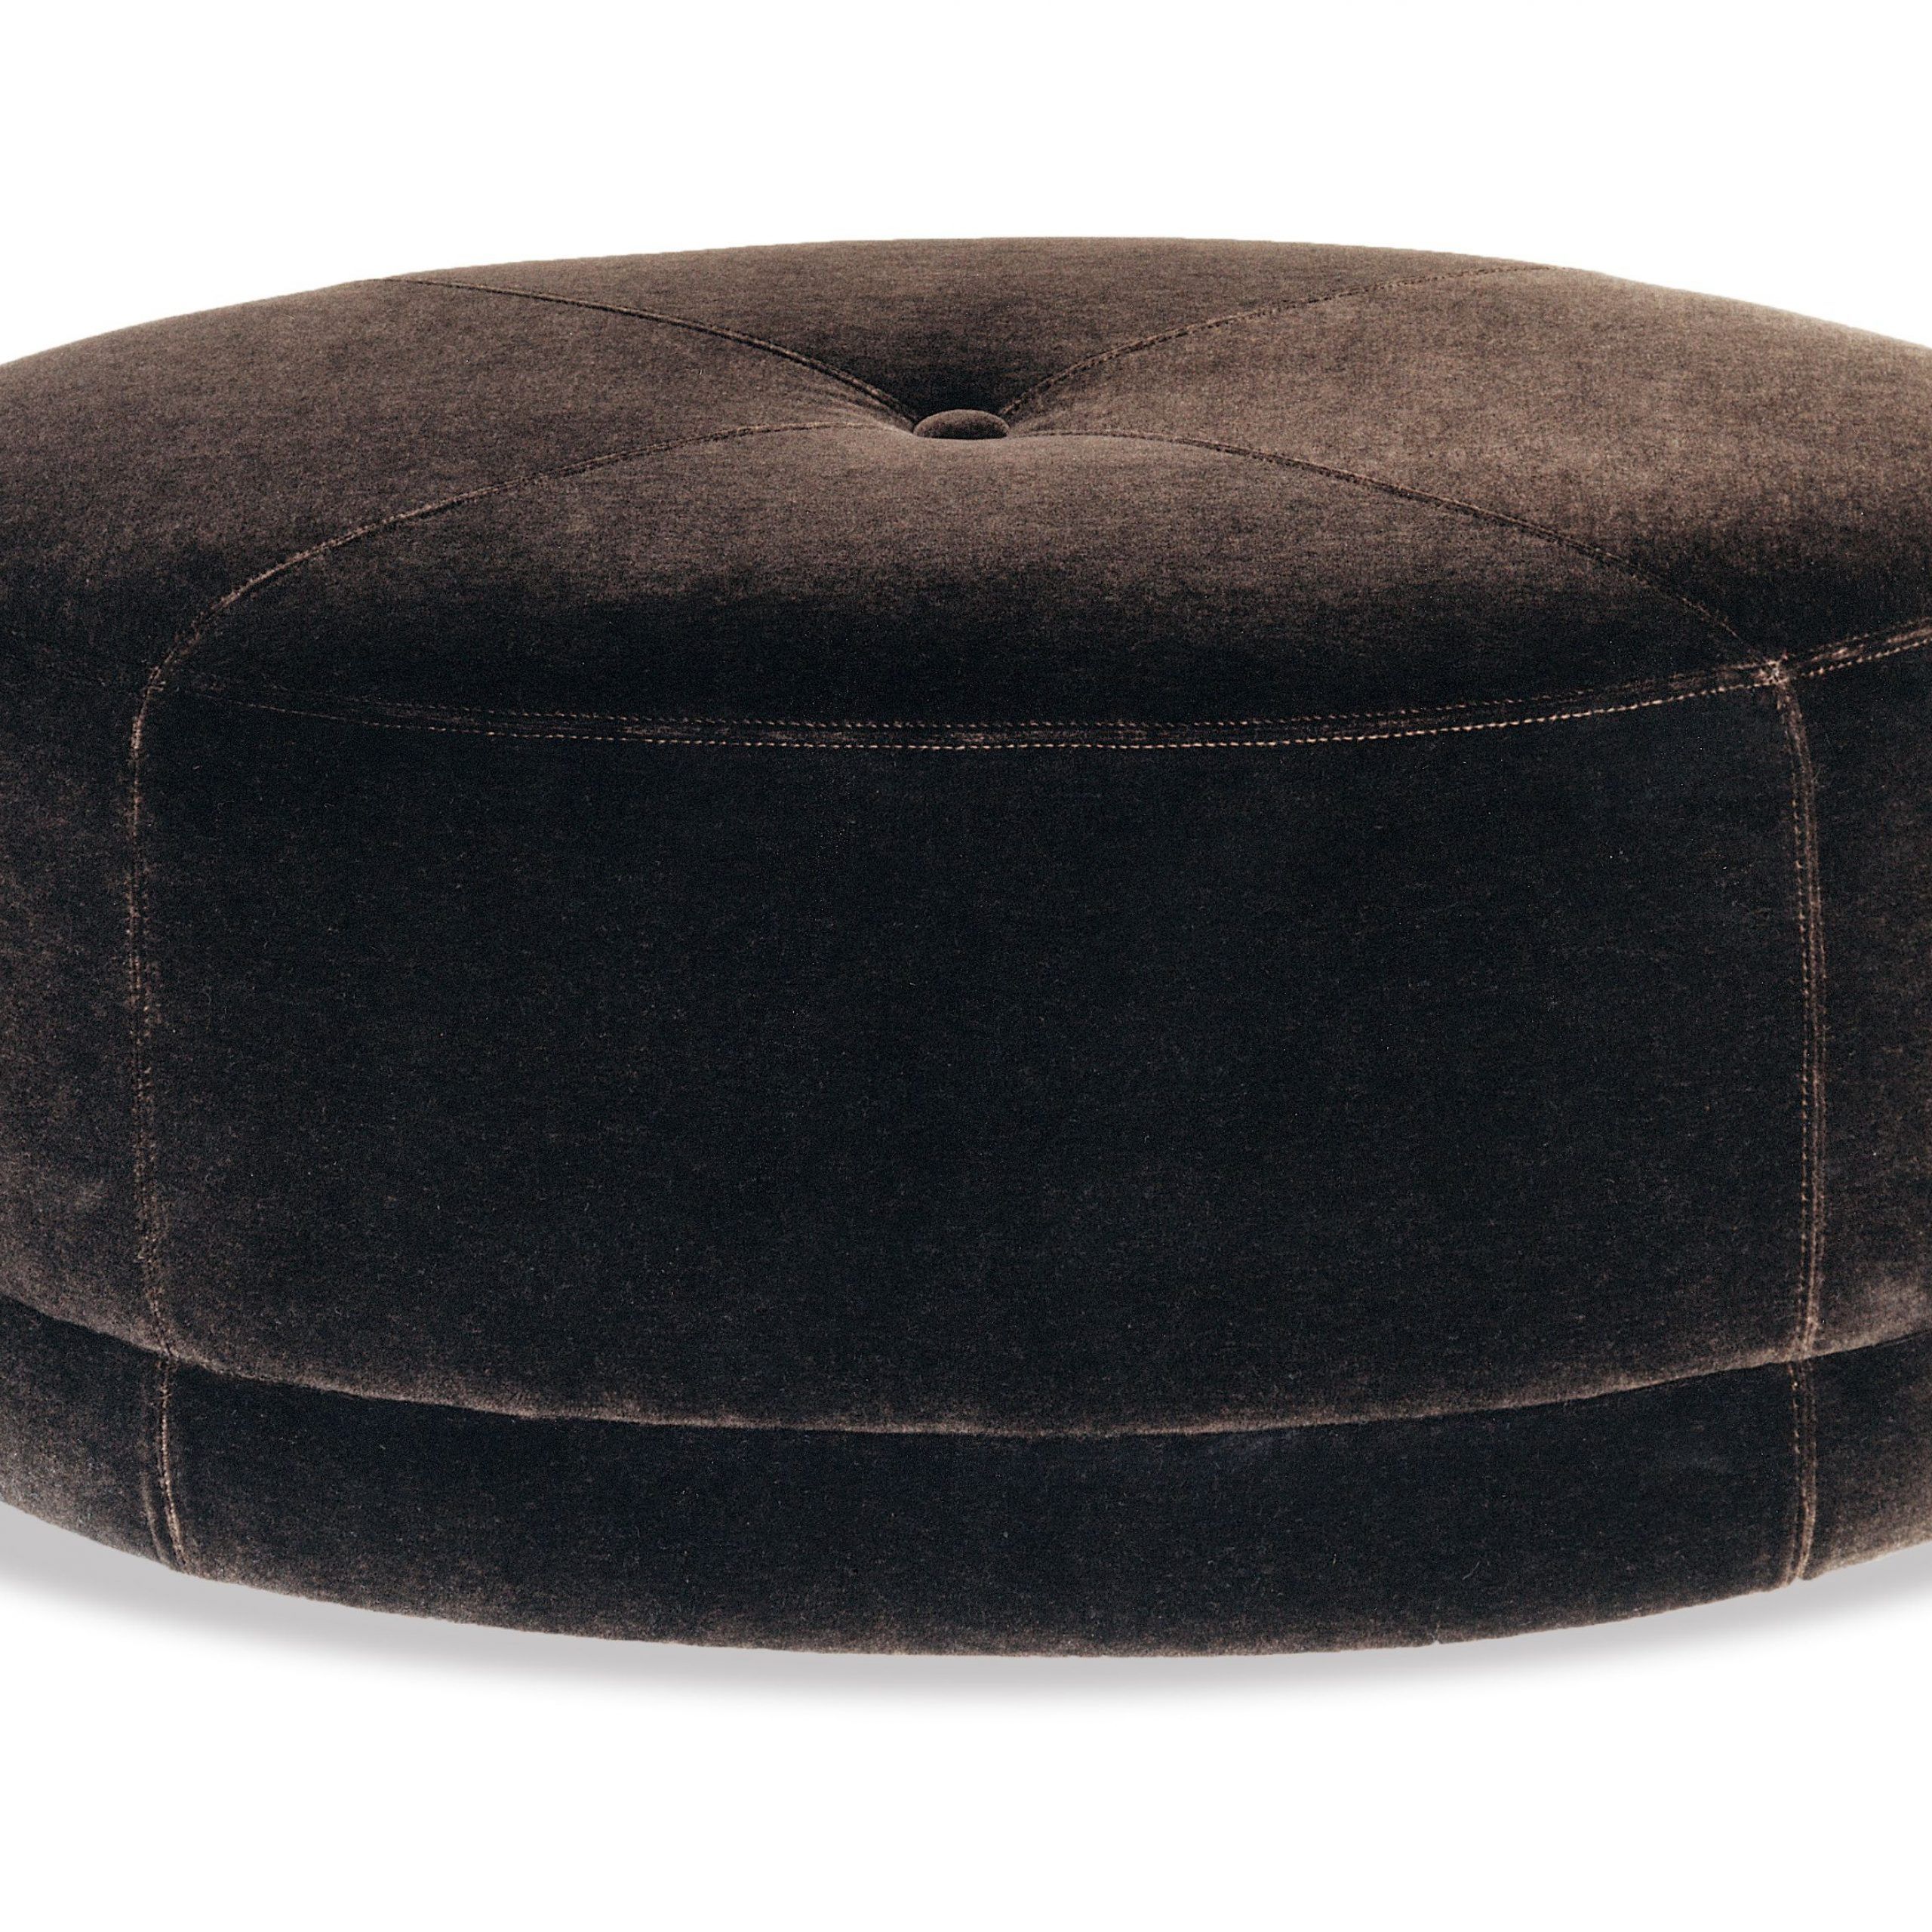 Beige And Dark Gray Ombre Cylinder Pouf Ottomans Regarding Trendy Pin On Art, Flowers, Accessories, Lighting, Rugs (View 8 of 10)